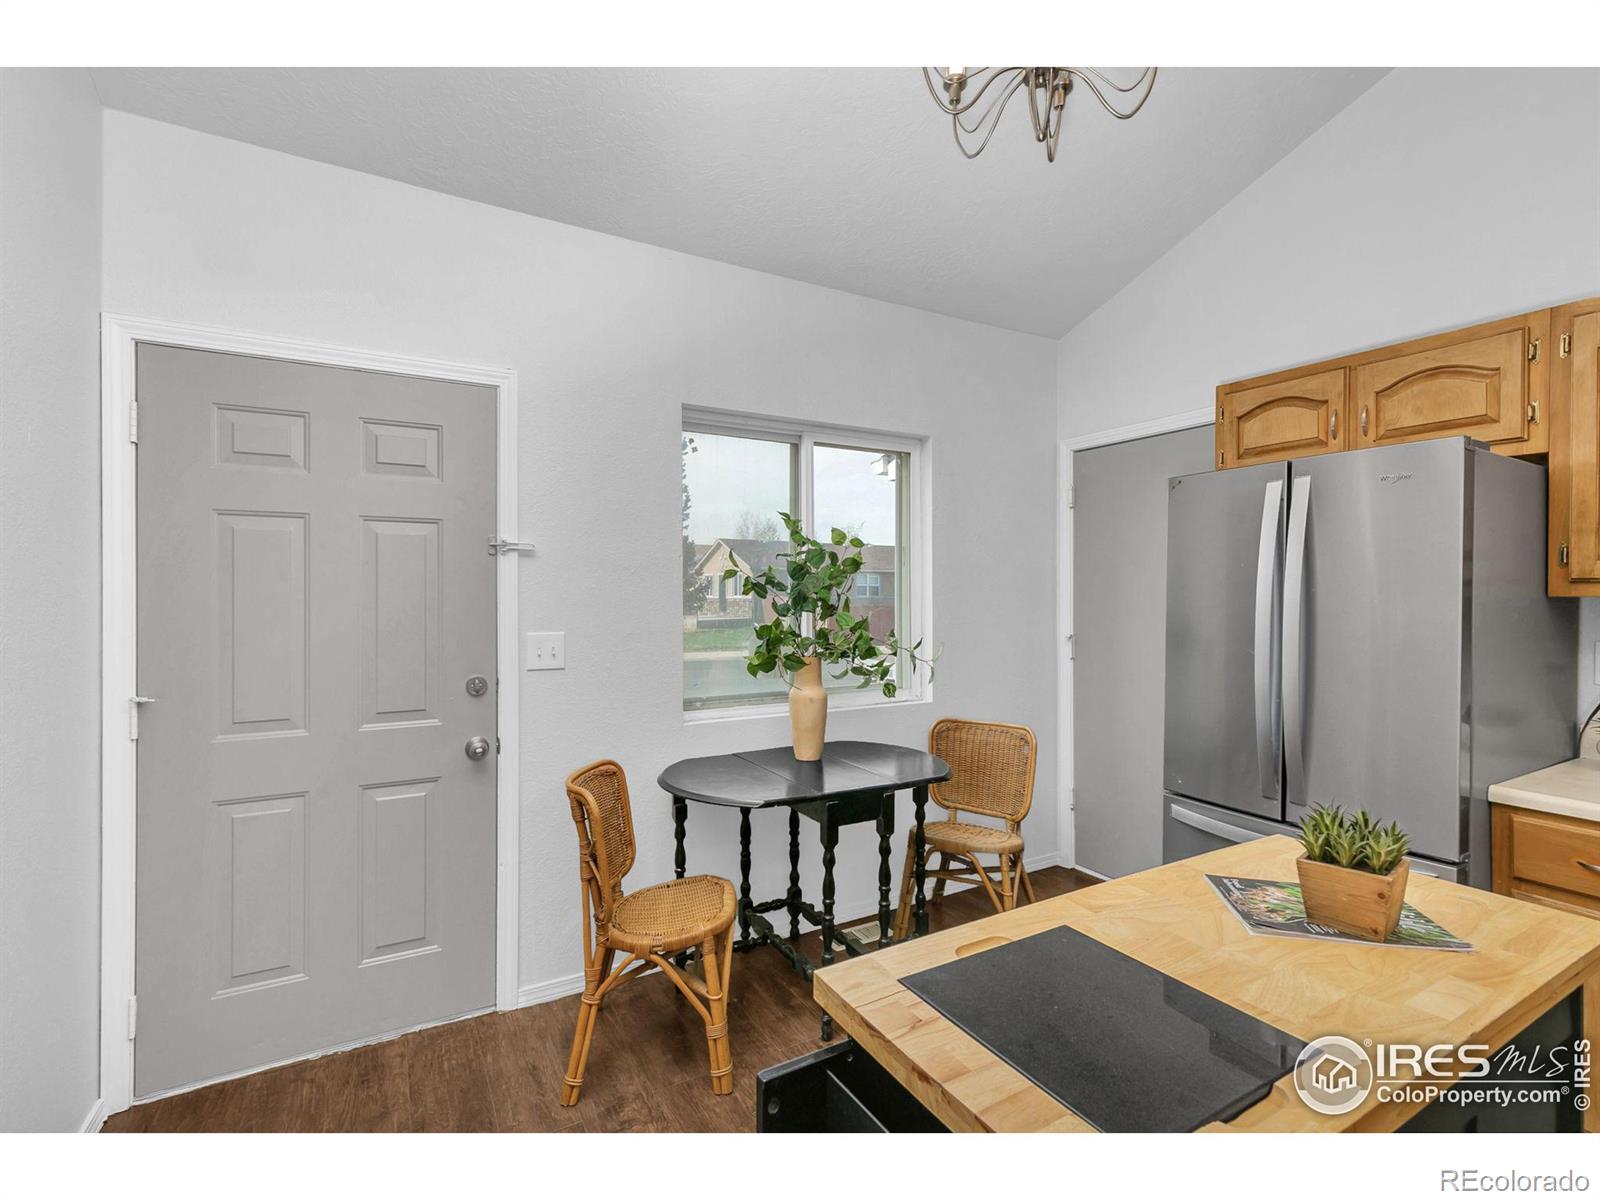 Report Image for 525 E 24th St Rd,Greeley, Colorado